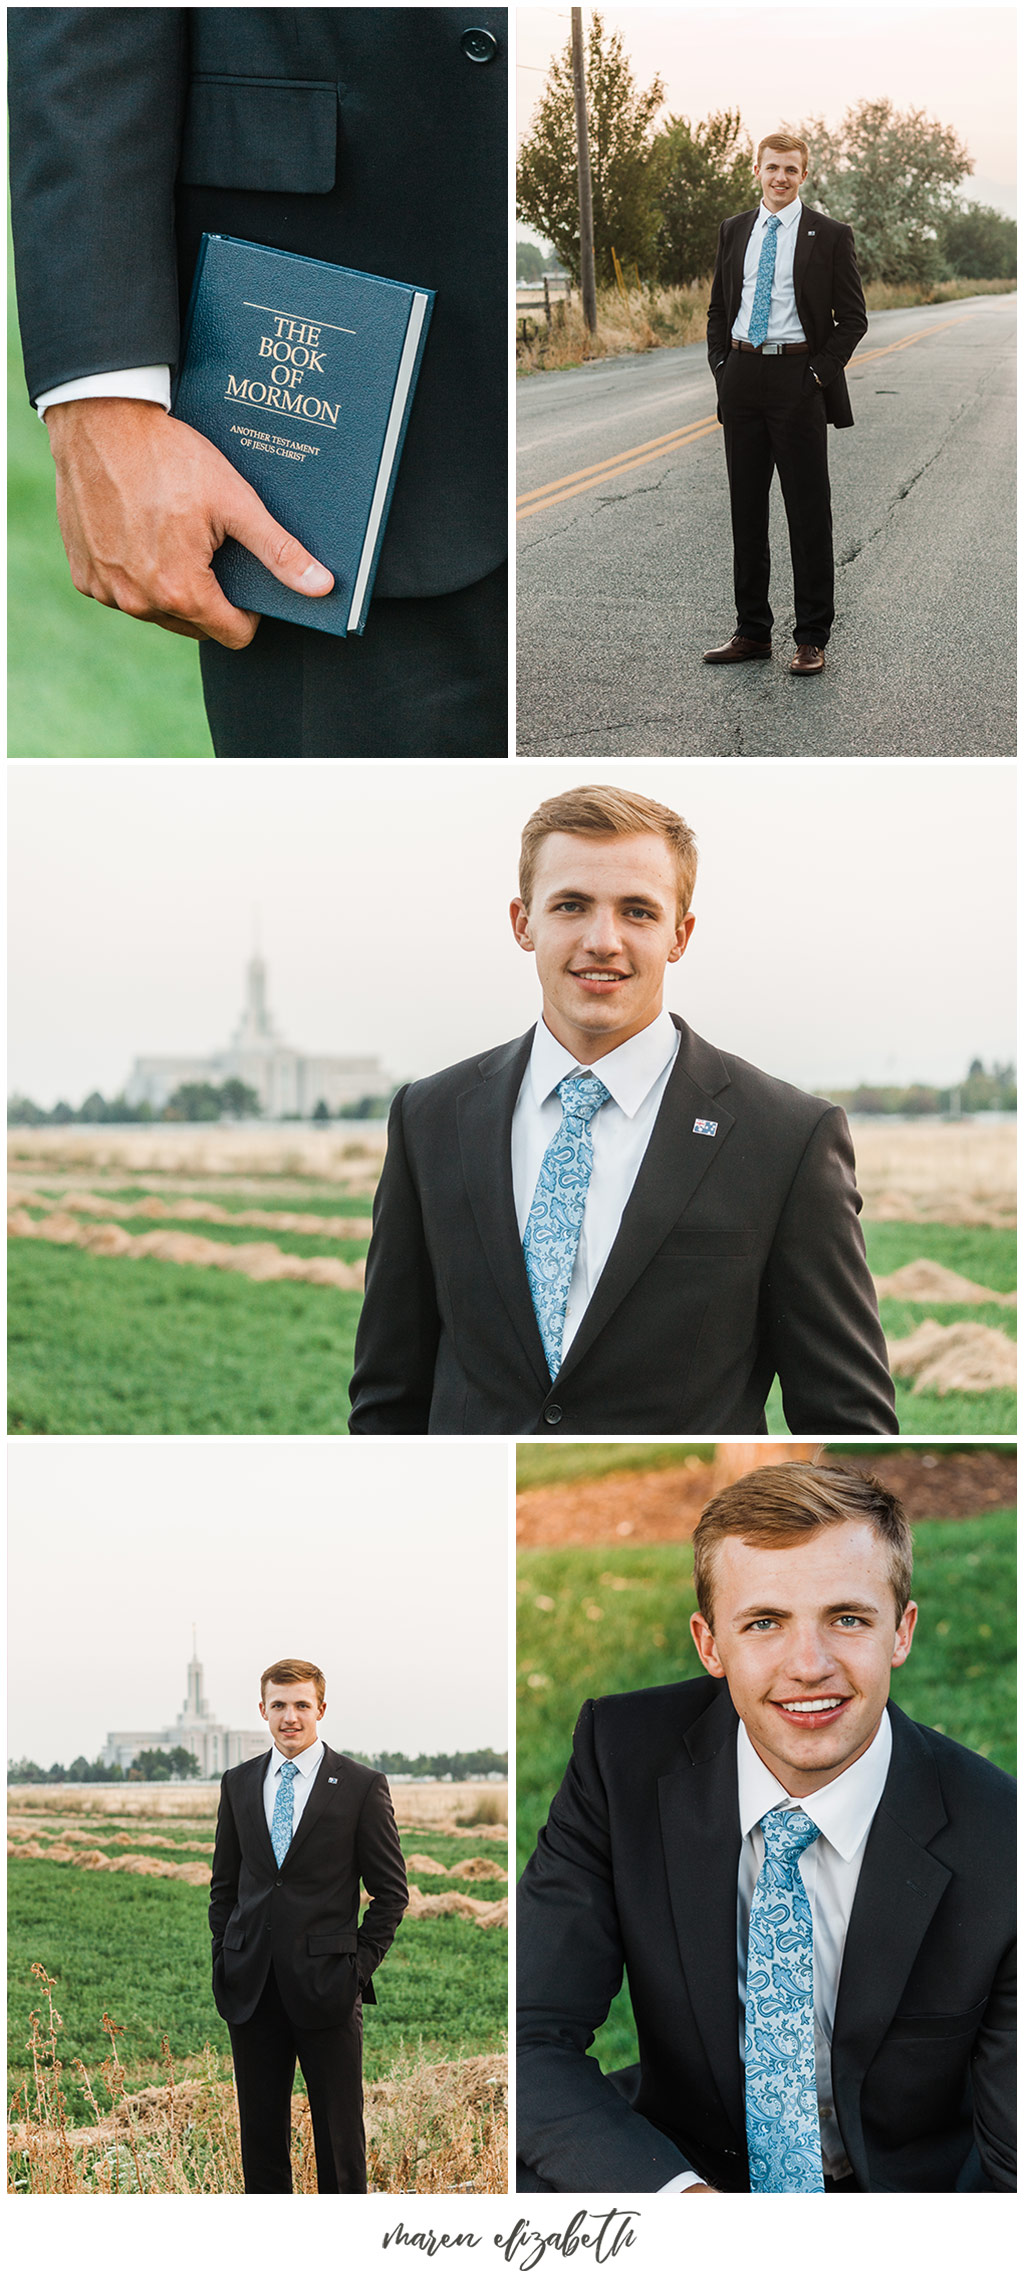 Since missionaries for the Church of Jesus Christ of Latter-day Saints can now serve when 18 I take a lot of Senior & Missionary pictures during the same session! Missionaries teach fundamental gospel truths that can change your life when you learn with real intent and put them to the test in your life. Find out more at Mormon.org. | Arizona Senior Photographer | Arizona Missionary Photographer | Maren Elizabeth Photography